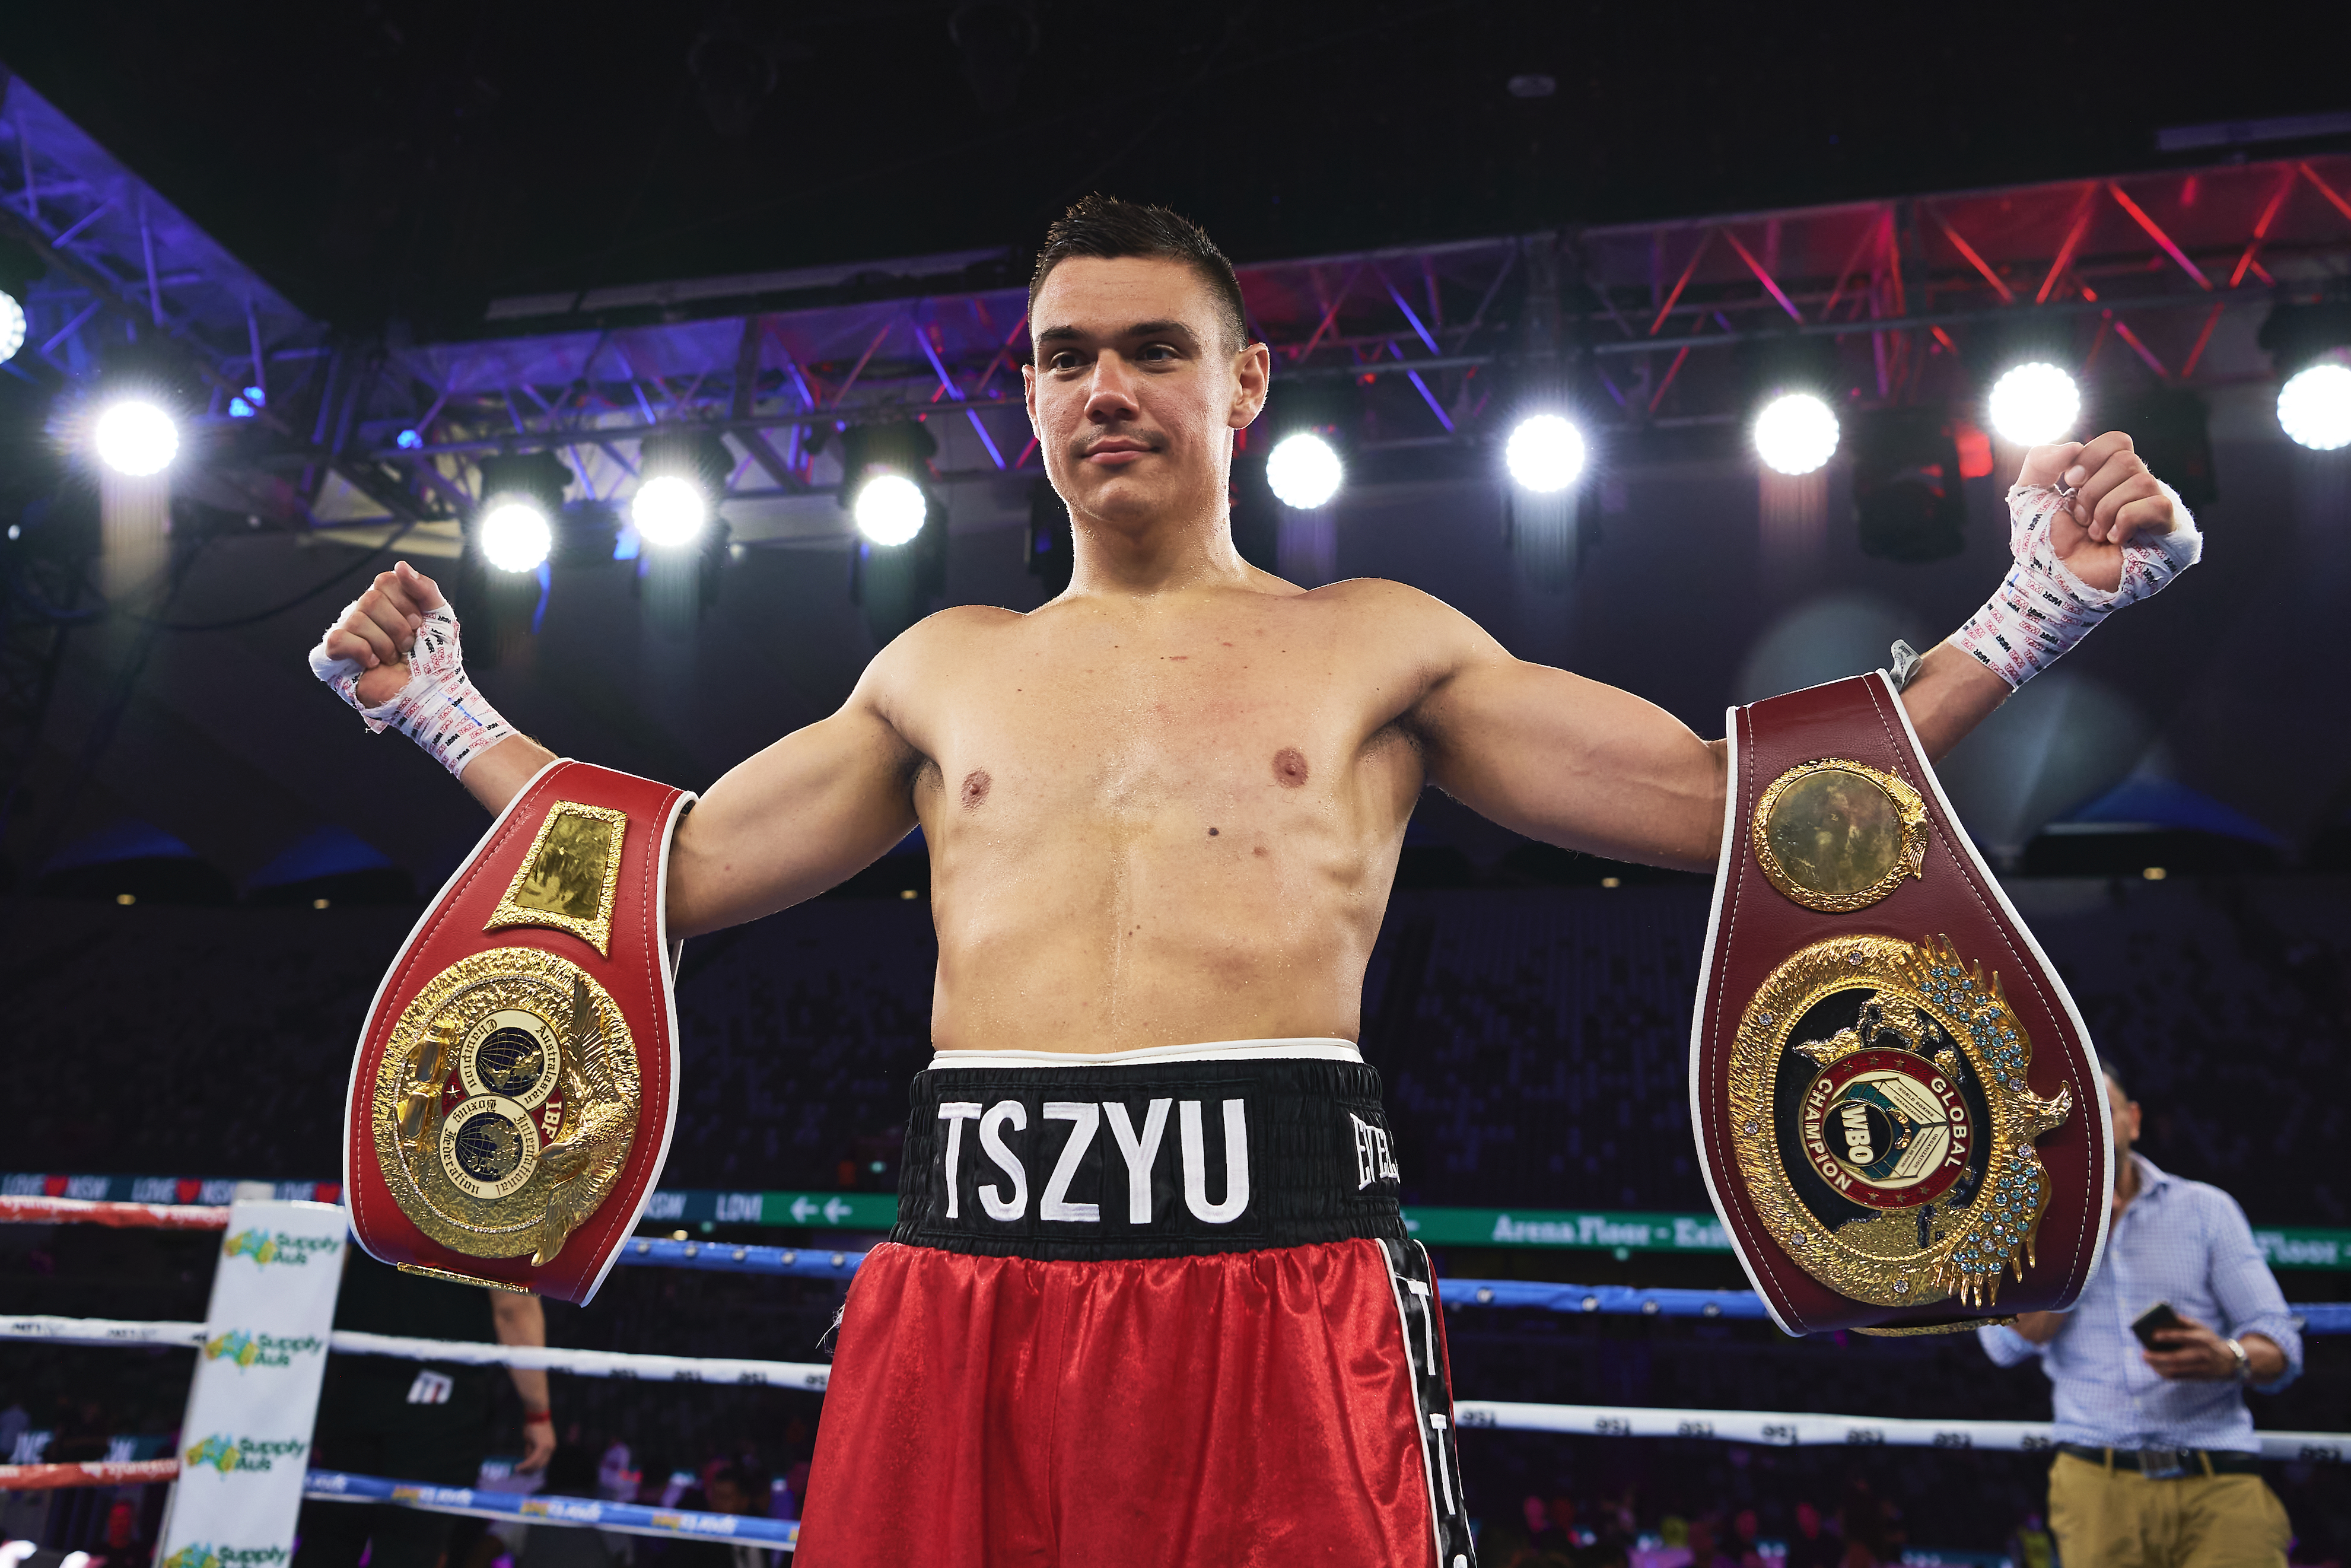 Tszyu vs Hogan live stream start time and how to watch the bout from anywhere in the world T3